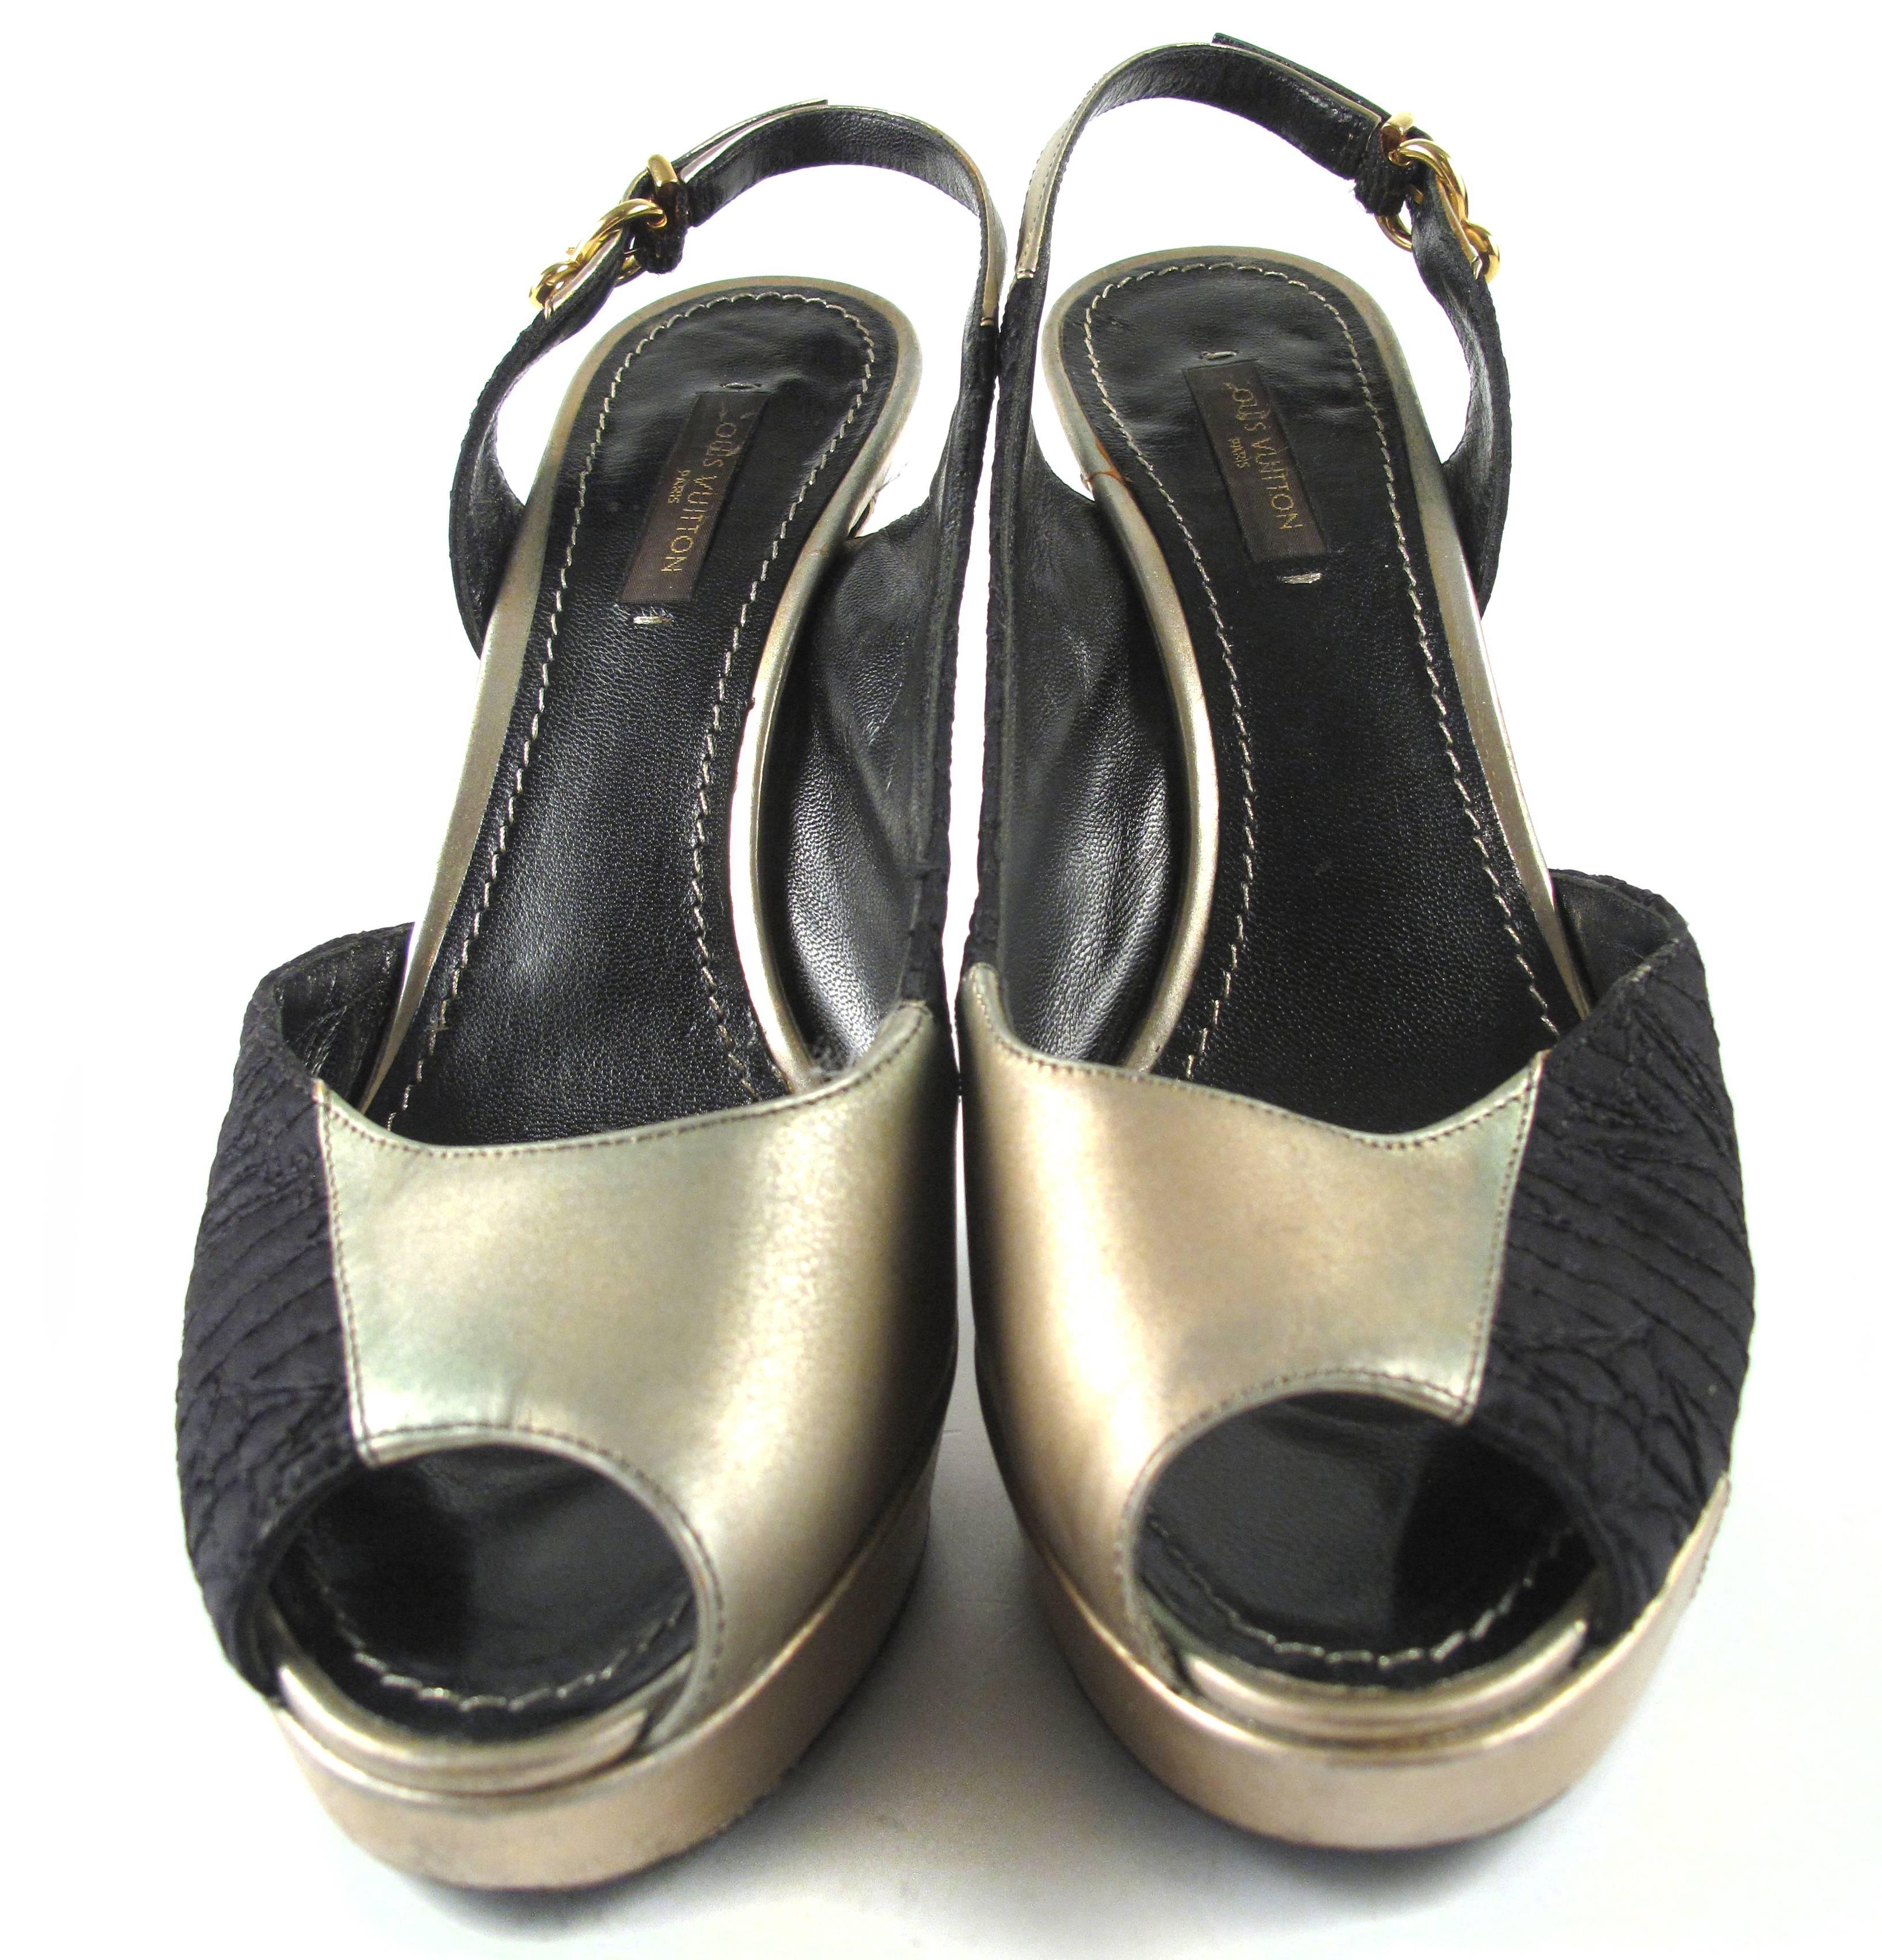 Louis Vuitton - Metallic Slingback Heels

Size: US 6.5 - 36.5

Color: Black / Gold

Material: Leather / Fabric

------------------------------------------------------------

Details:

- peep toe

- monogrammed fabric panels

-